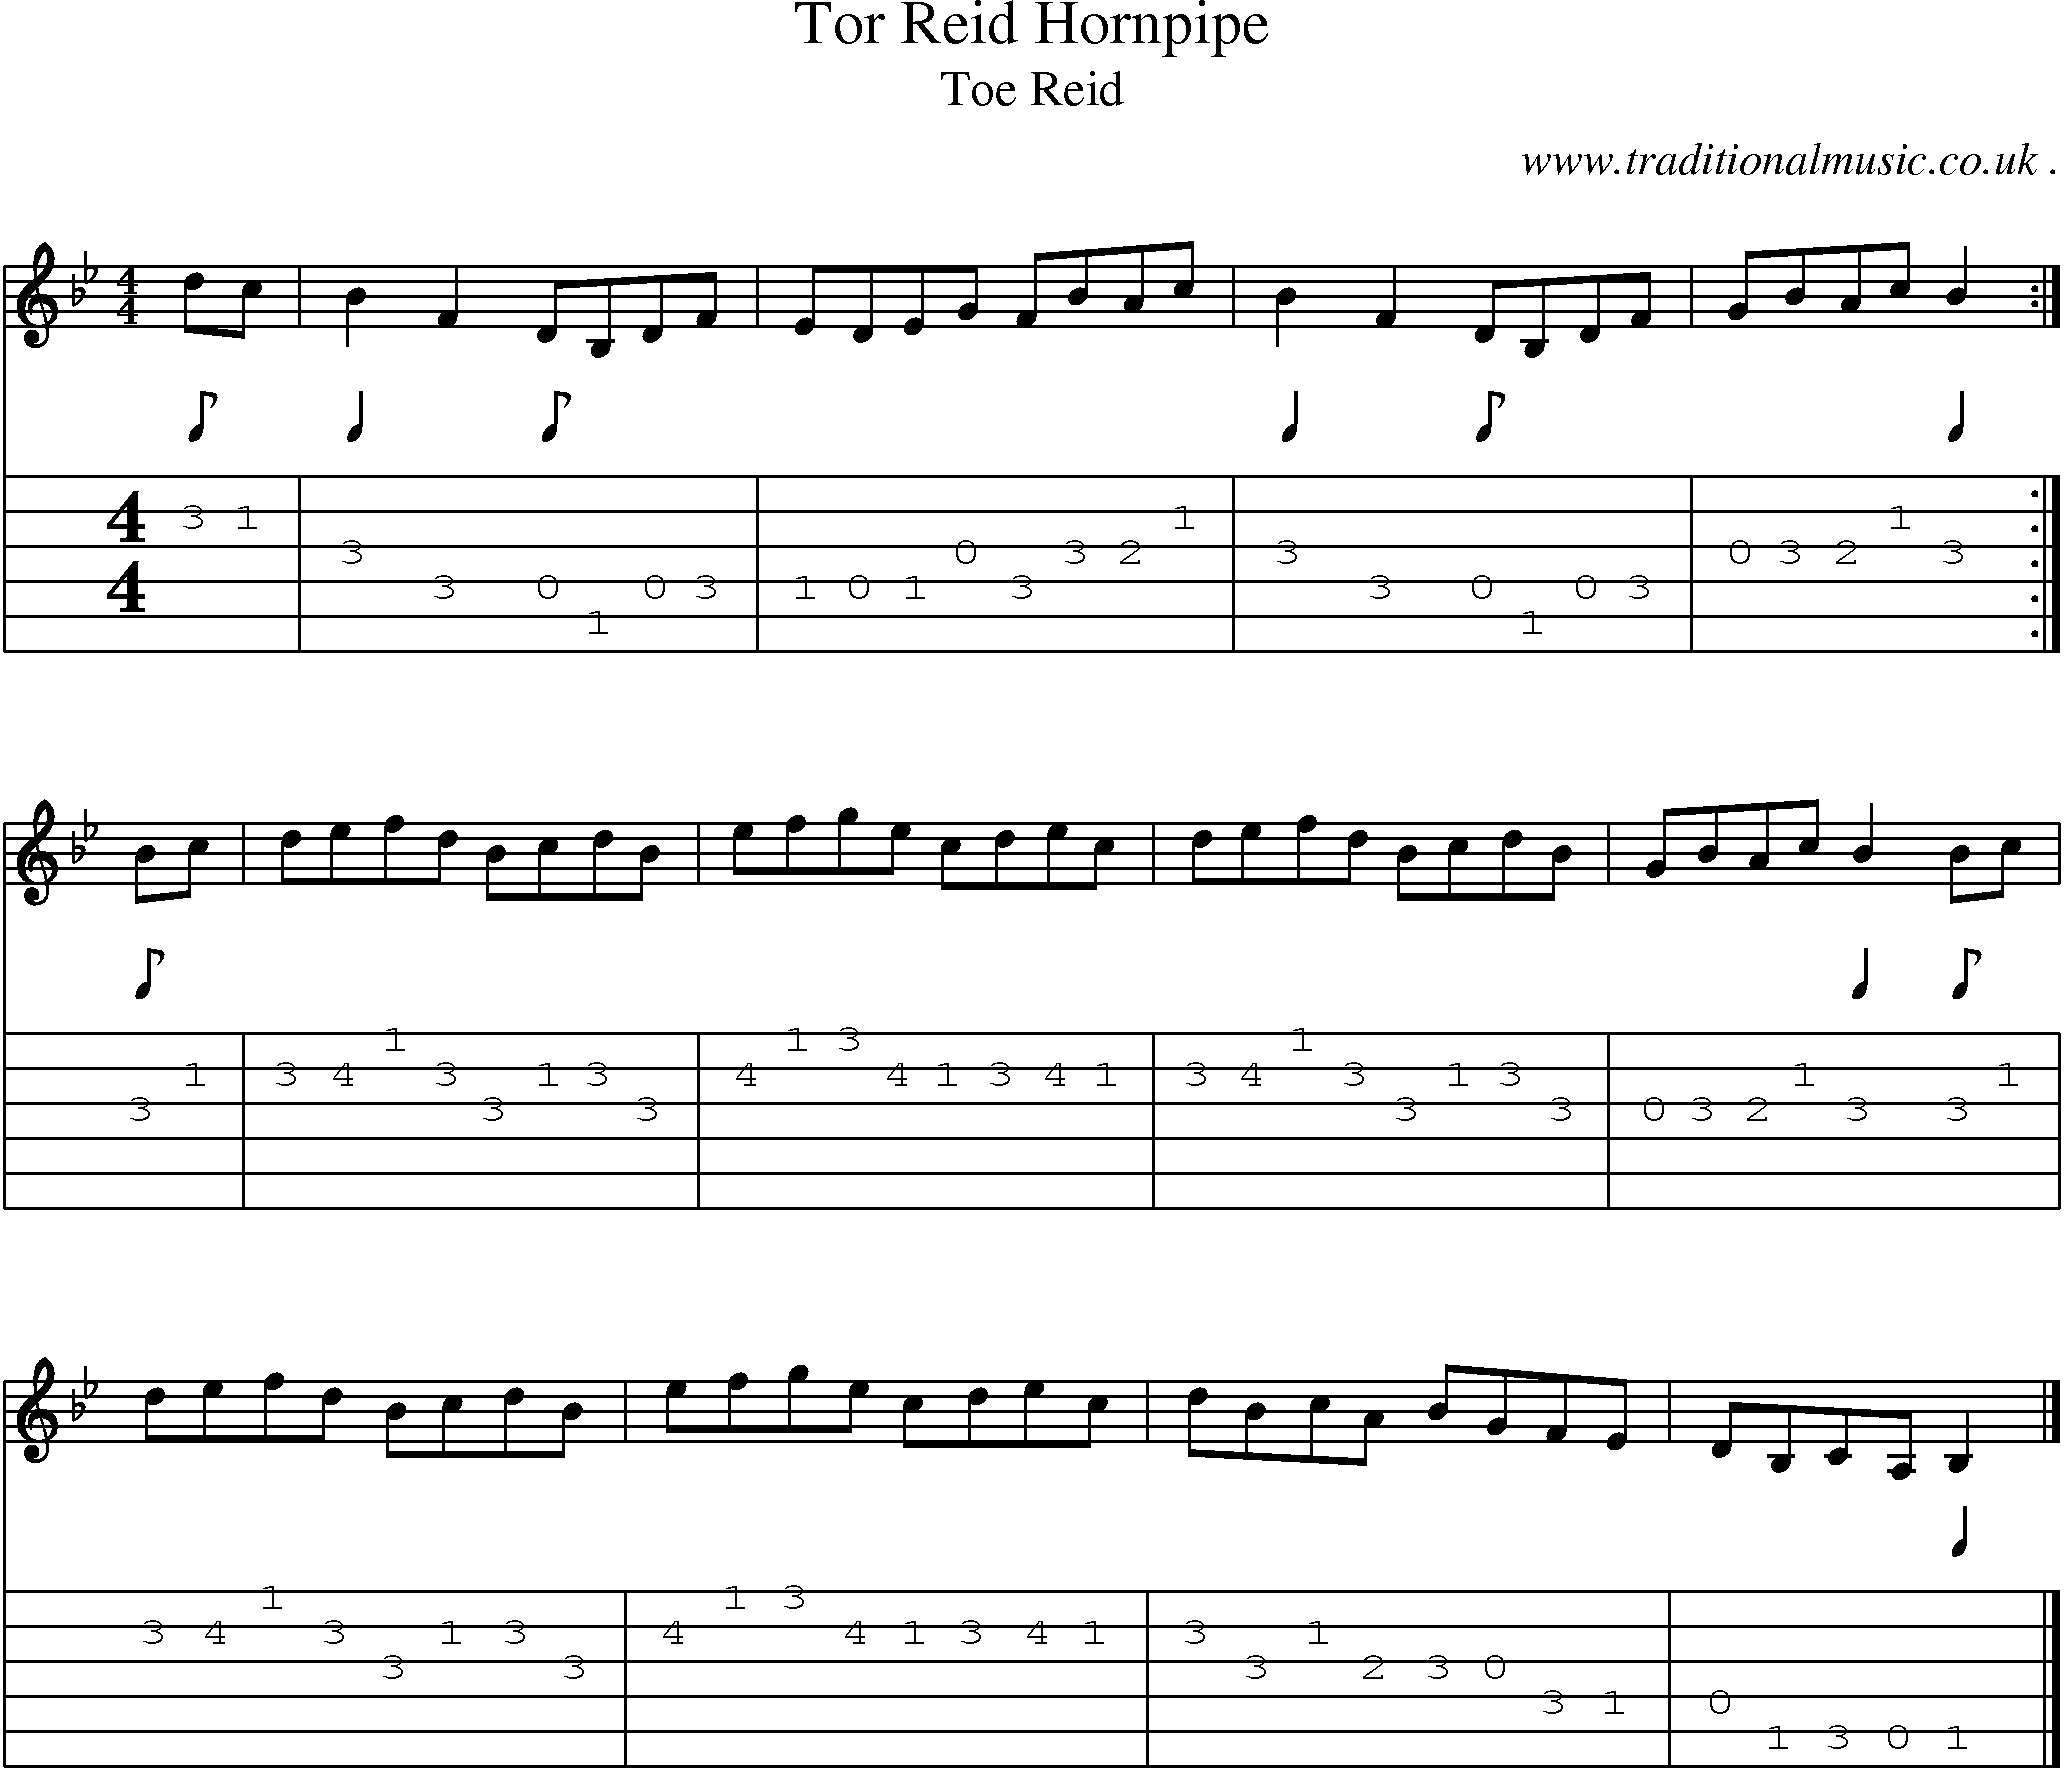 Sheet-music  score, Chords and Guitar Tabs for Tor Reid Hornpipe